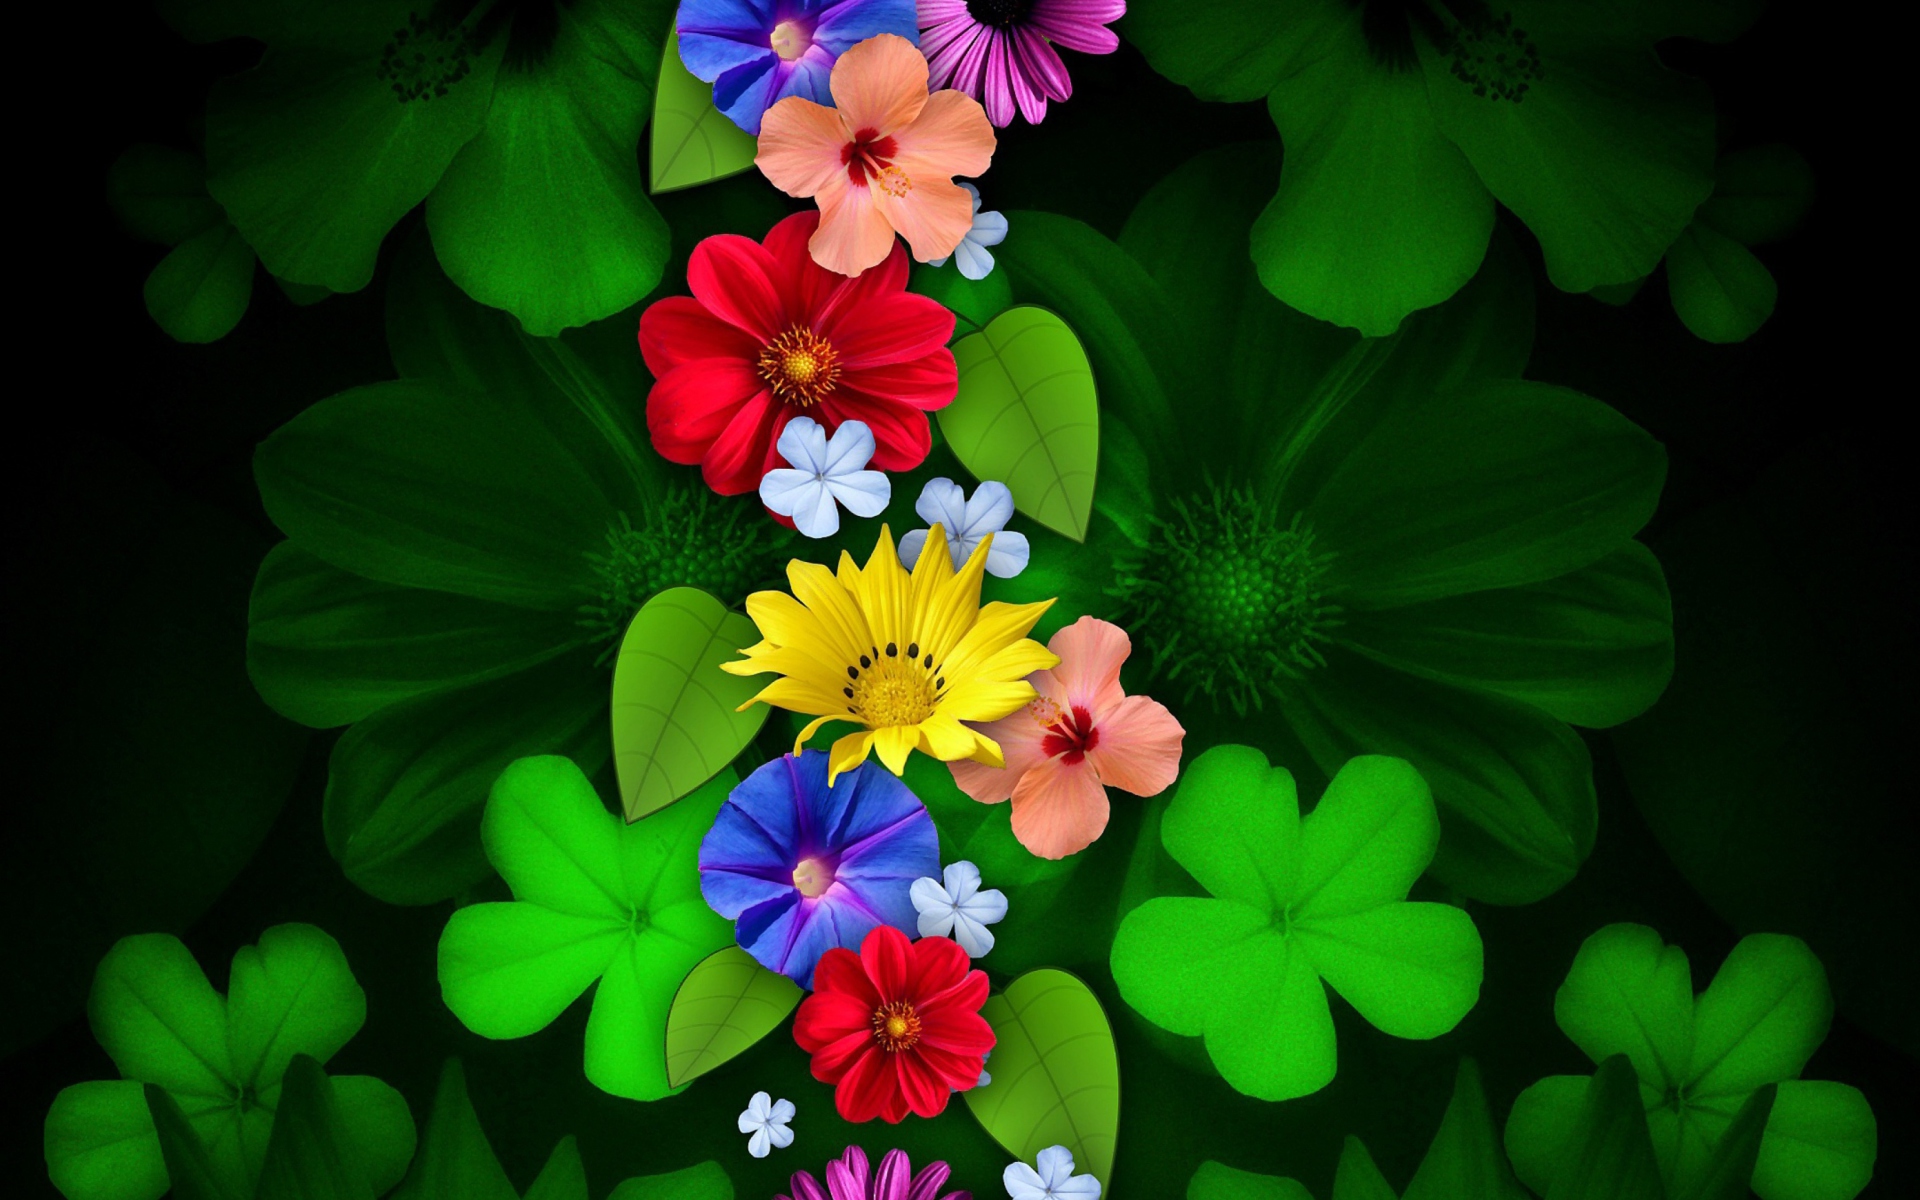 Green Floral Background Images, HD Pictures and Wallpaper For Free Download